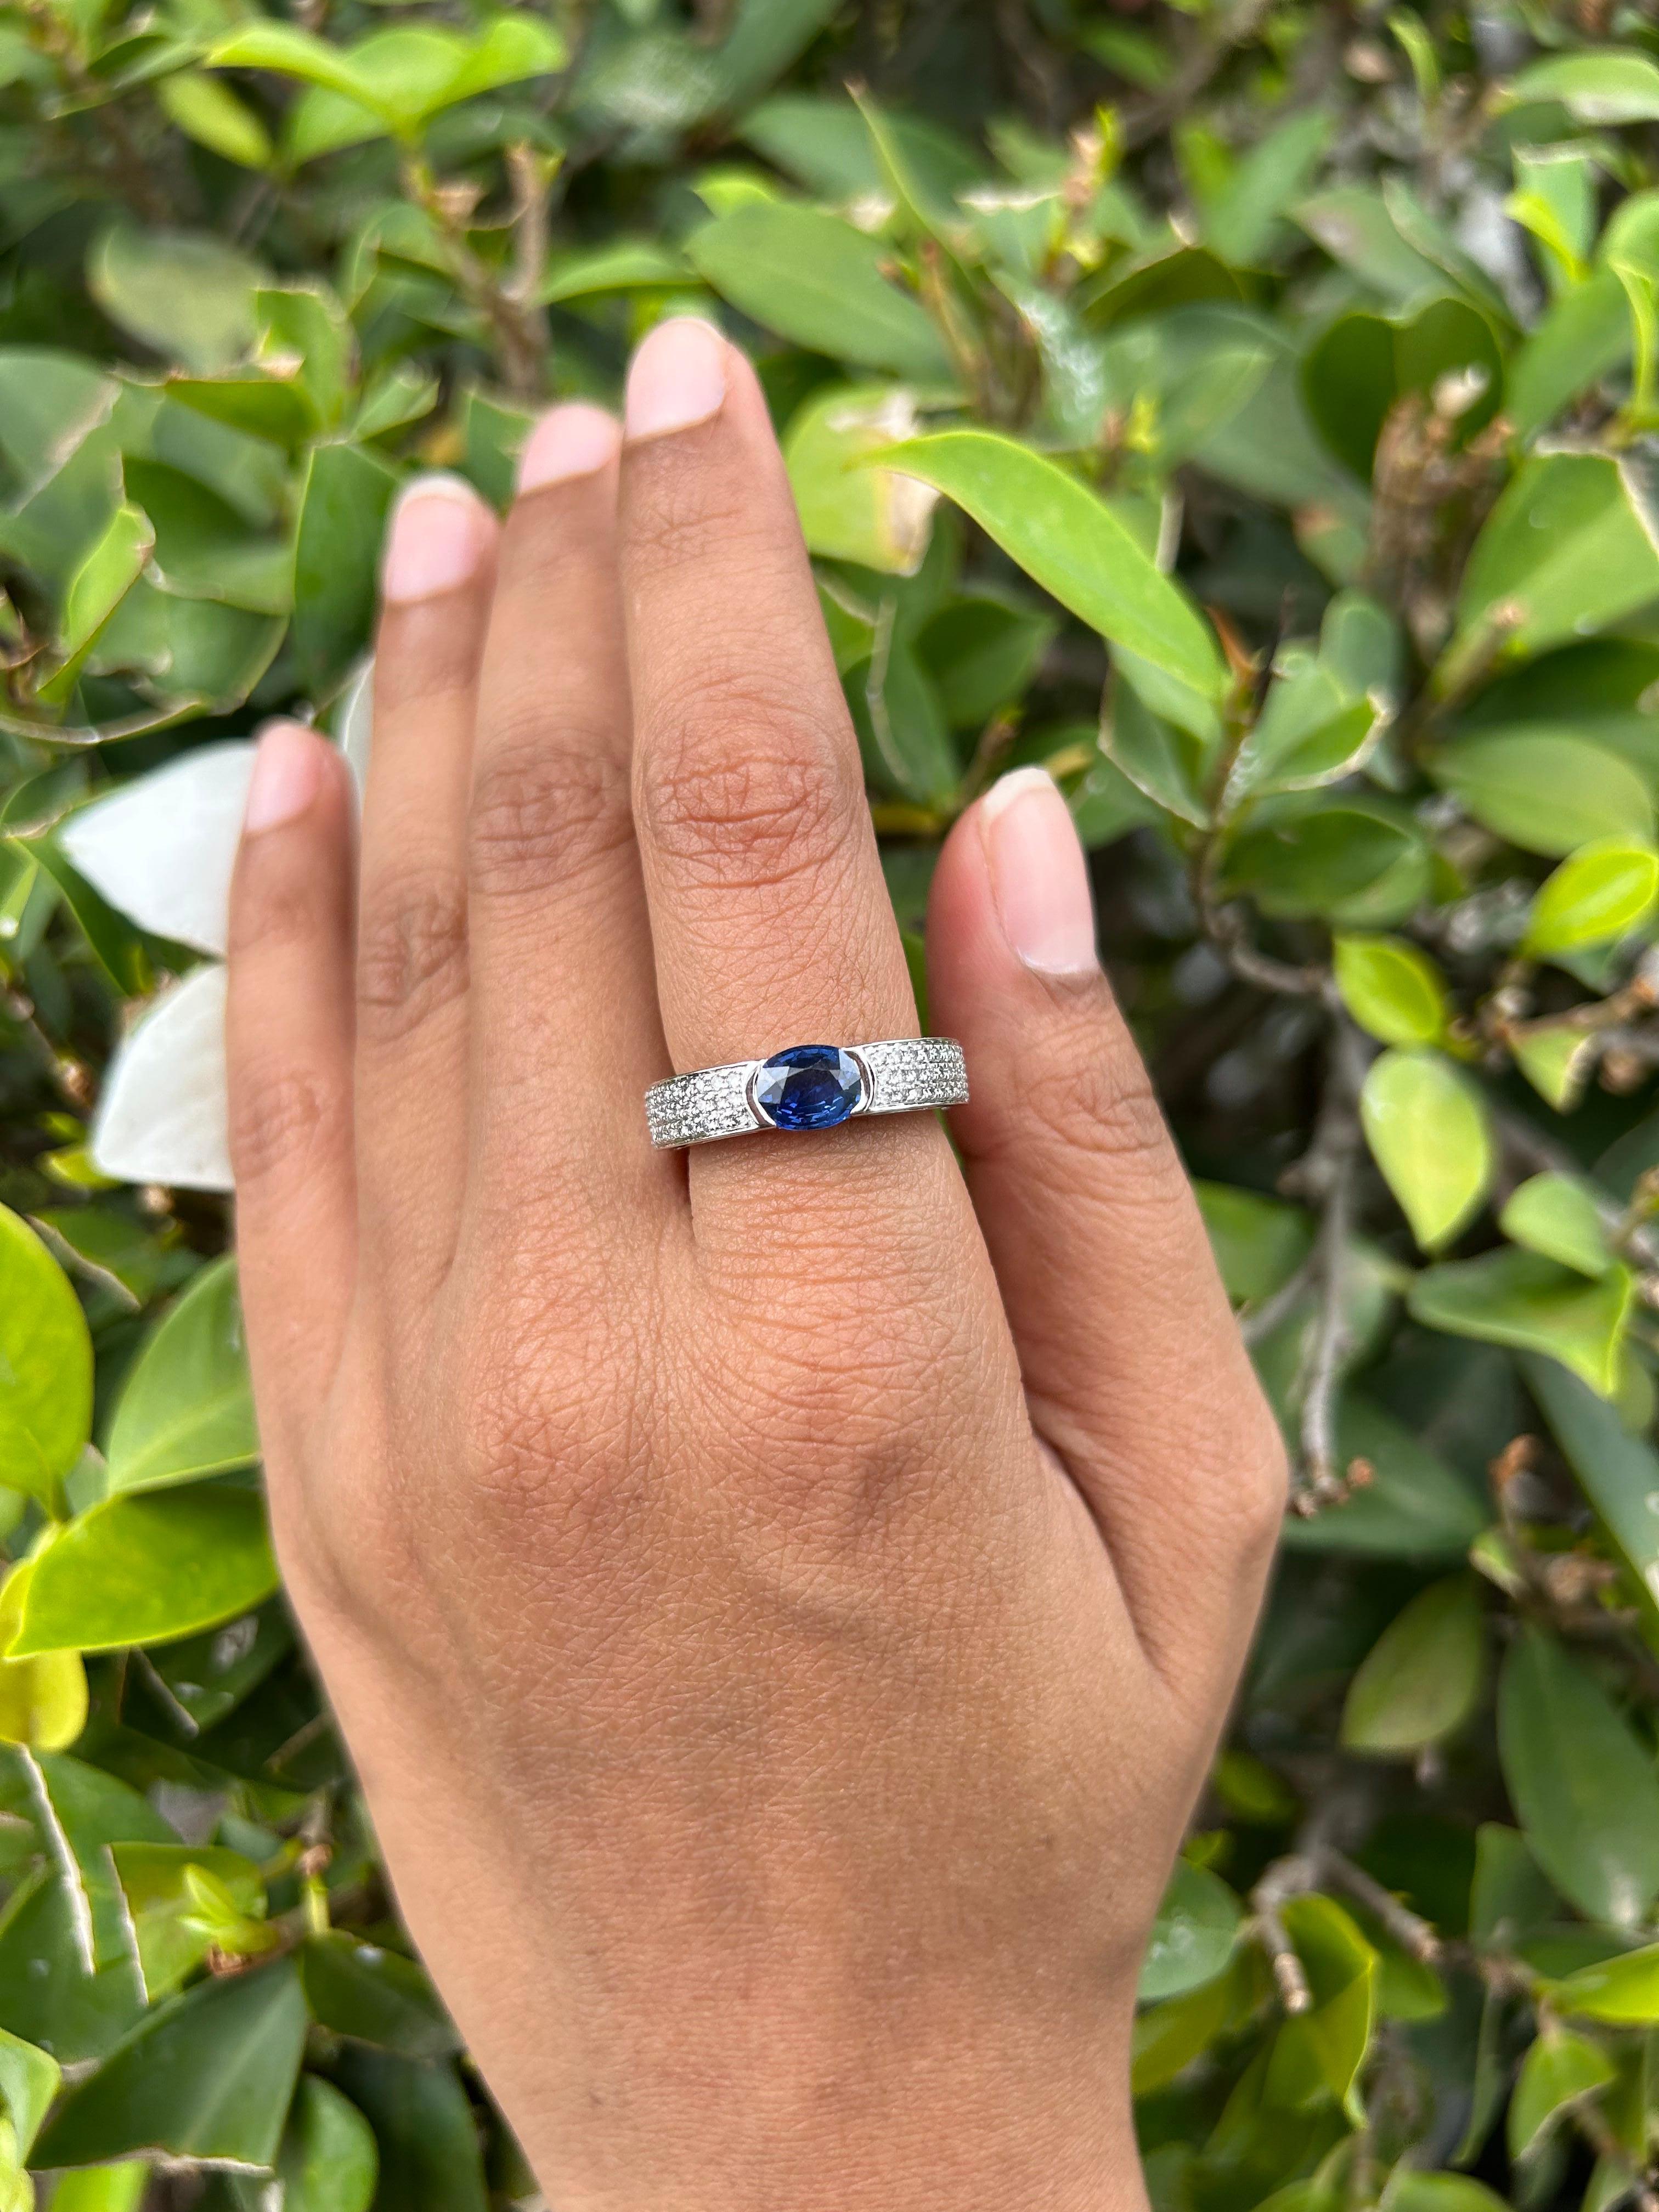 For Sale:  Unisex Blue Sapphire Diamond Engagement Band Ring in 18k Solid White Gold 6